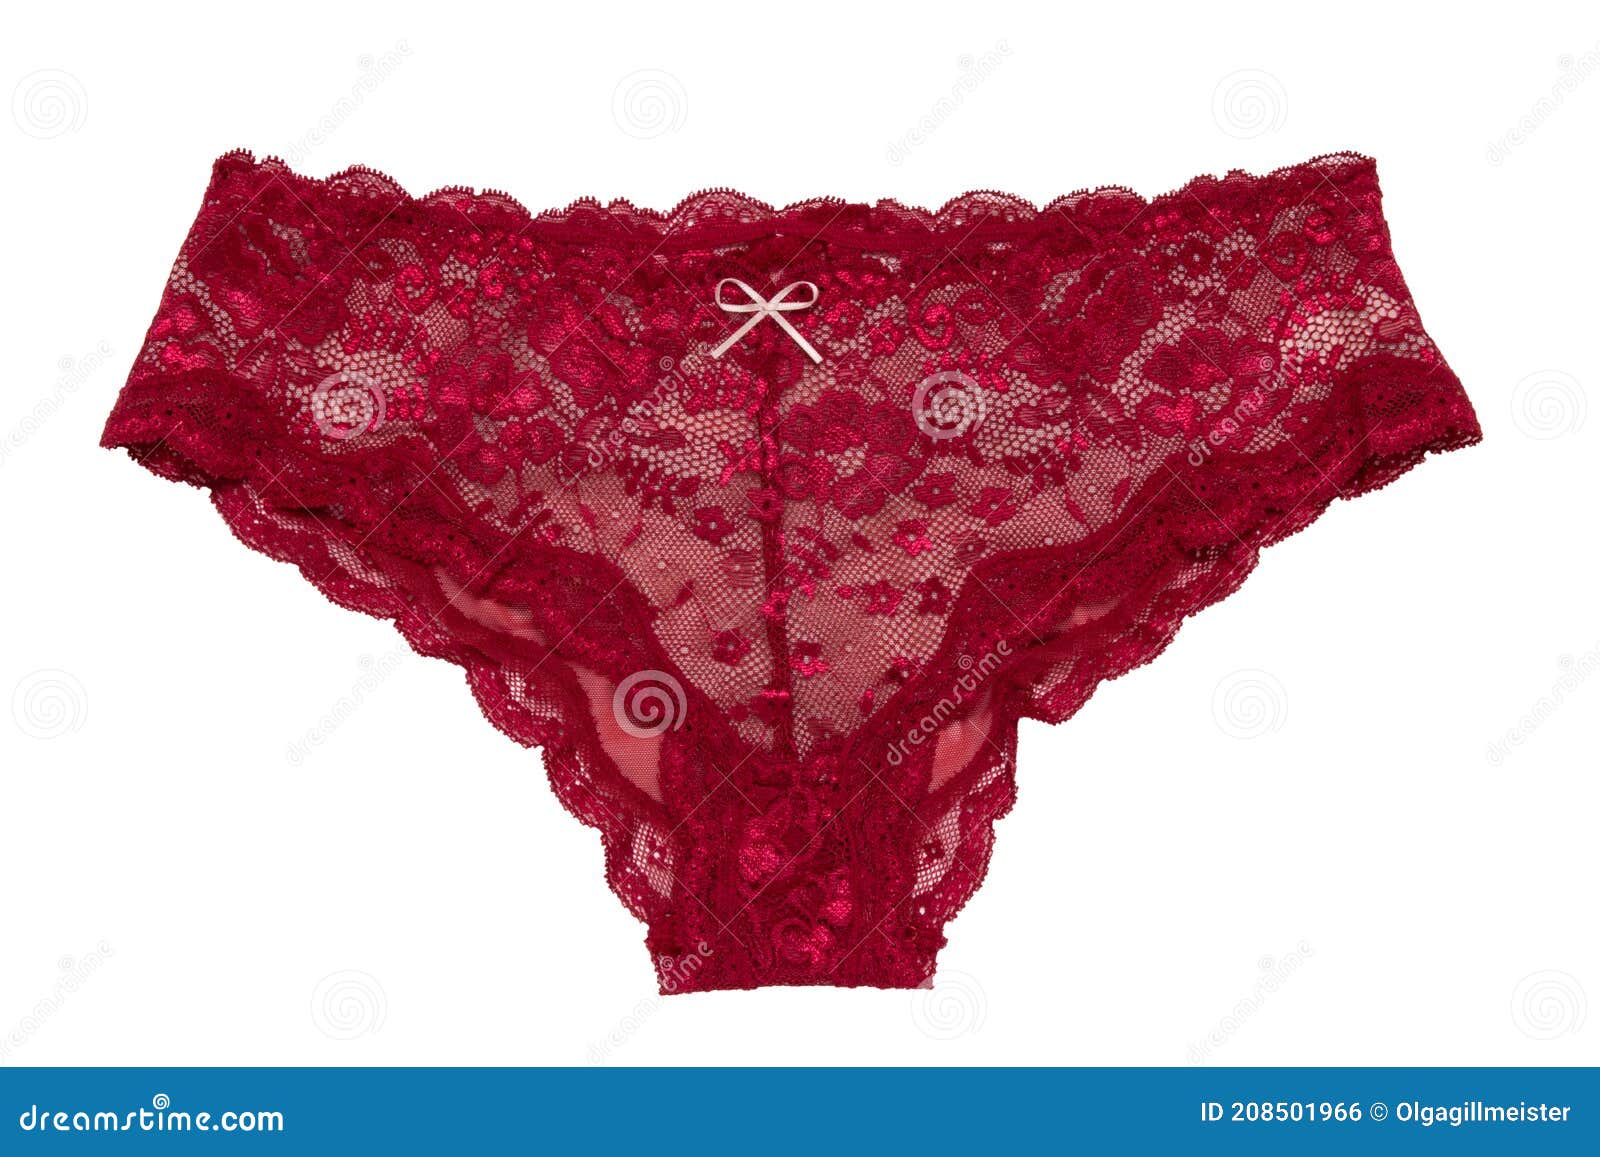 Underwear Woman Isolated. Close-up of a Luxurious Elegant Red Lacy Thongs  Panties Isolated on a White Background Stock Photo - Image of costume,  model: 208501966